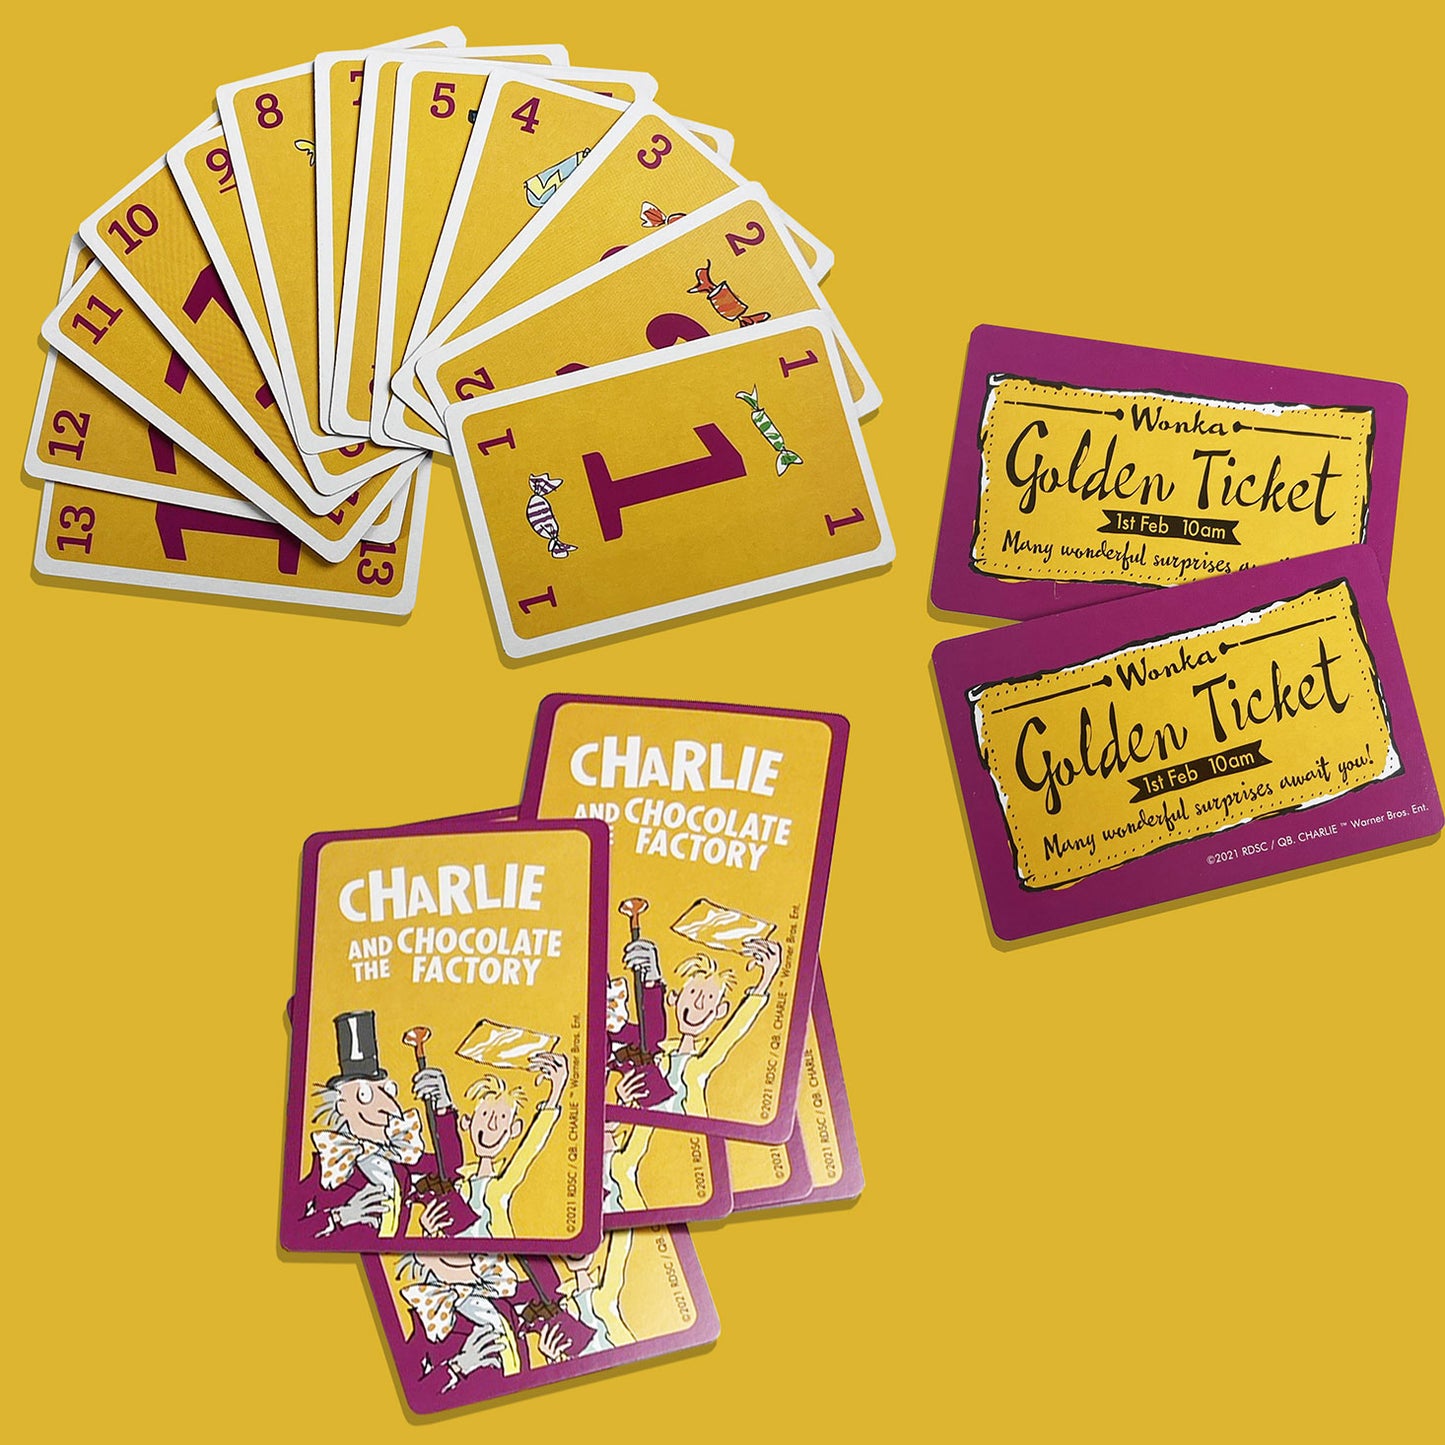 Contents of Charlie and the Chocolate Factory Marvellous Maths game